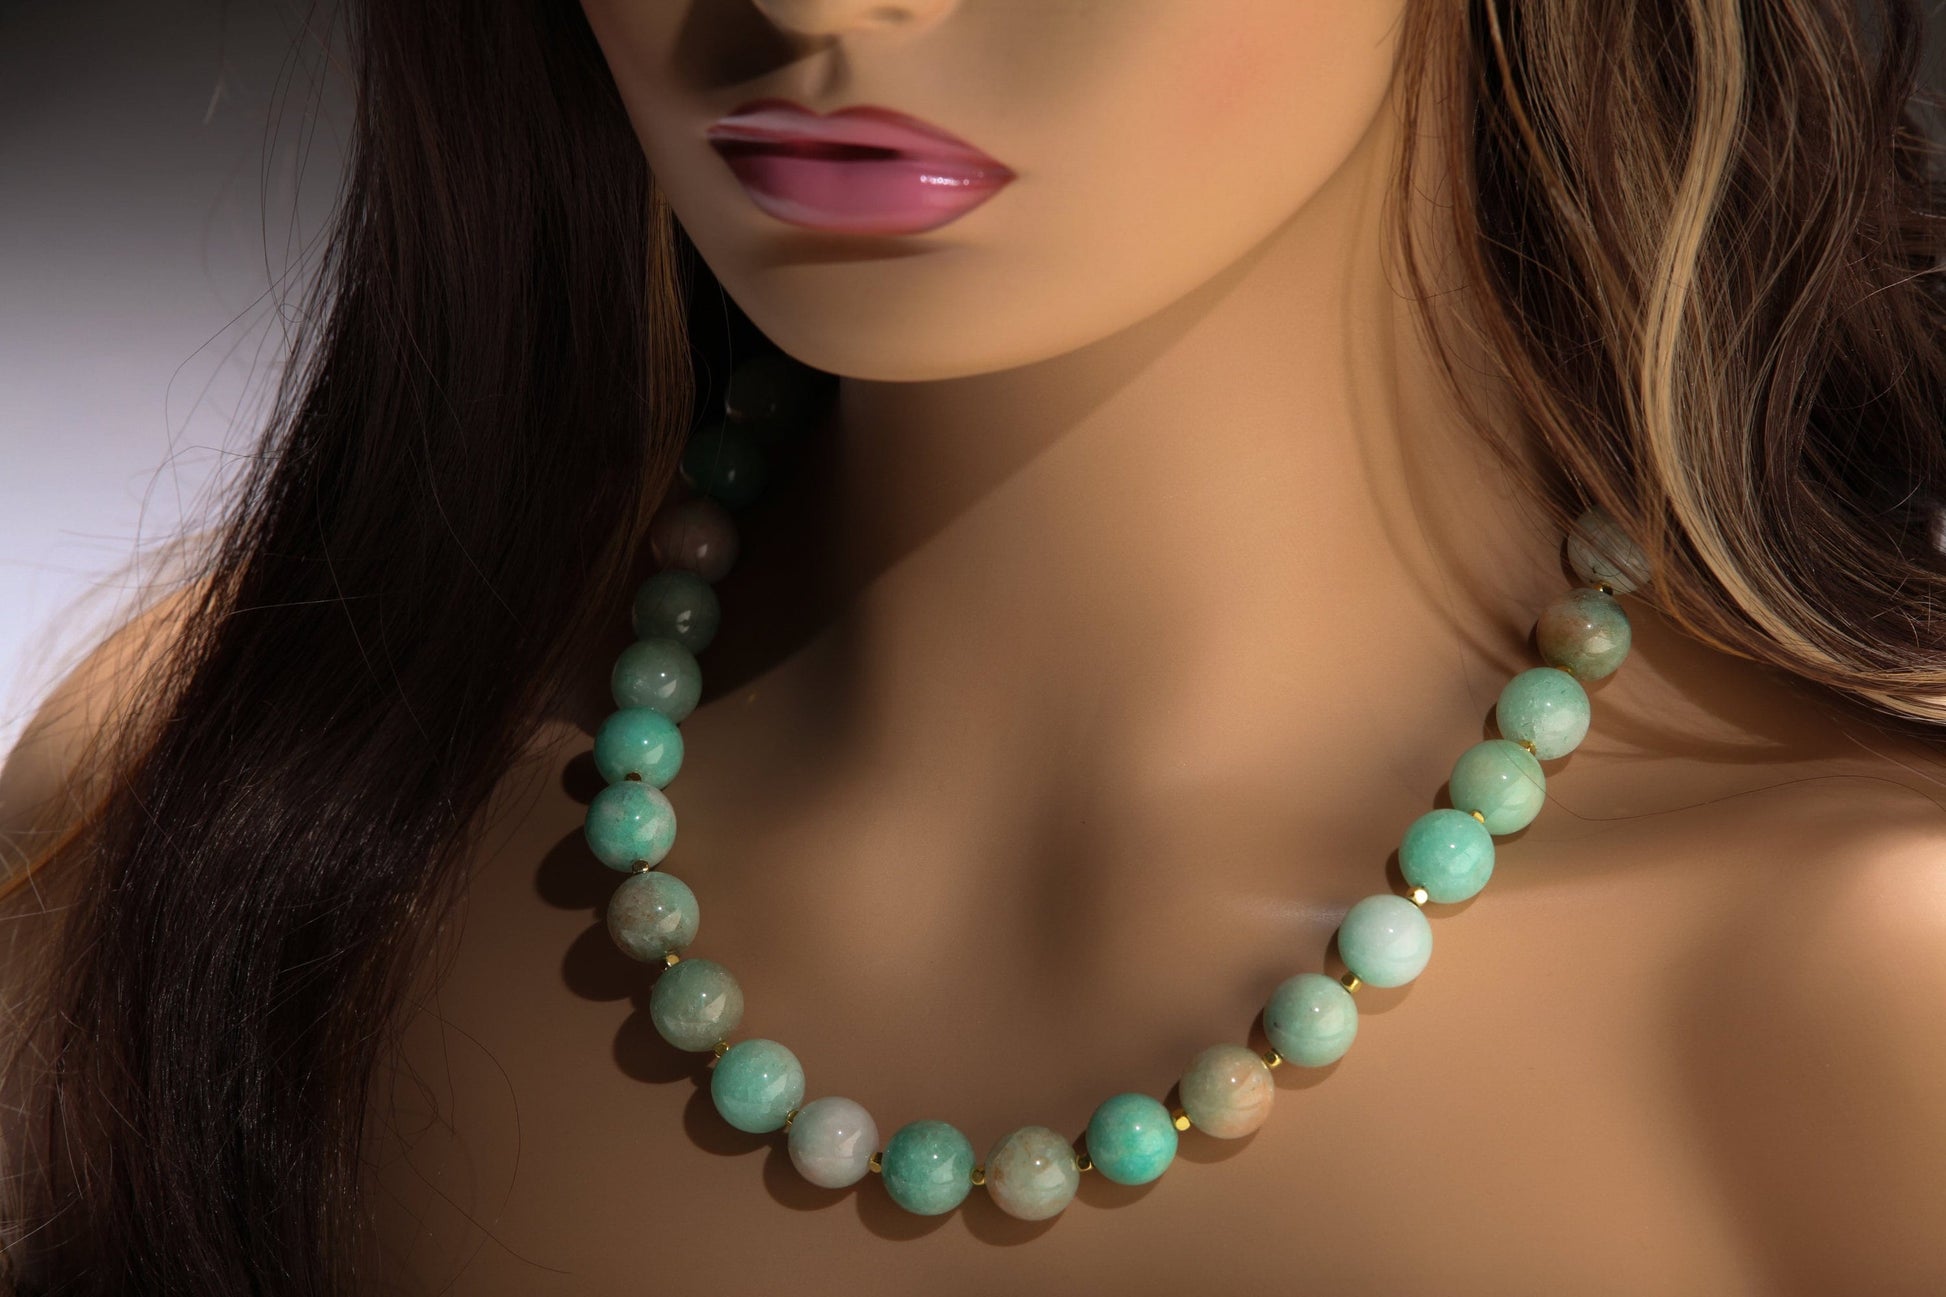 Natural Multi Amazonite AAA quality large smooth Round 14mm Gemstone bead 20&quot; Necklace with 2&quot; Extension, Beautiful Gift For Her.